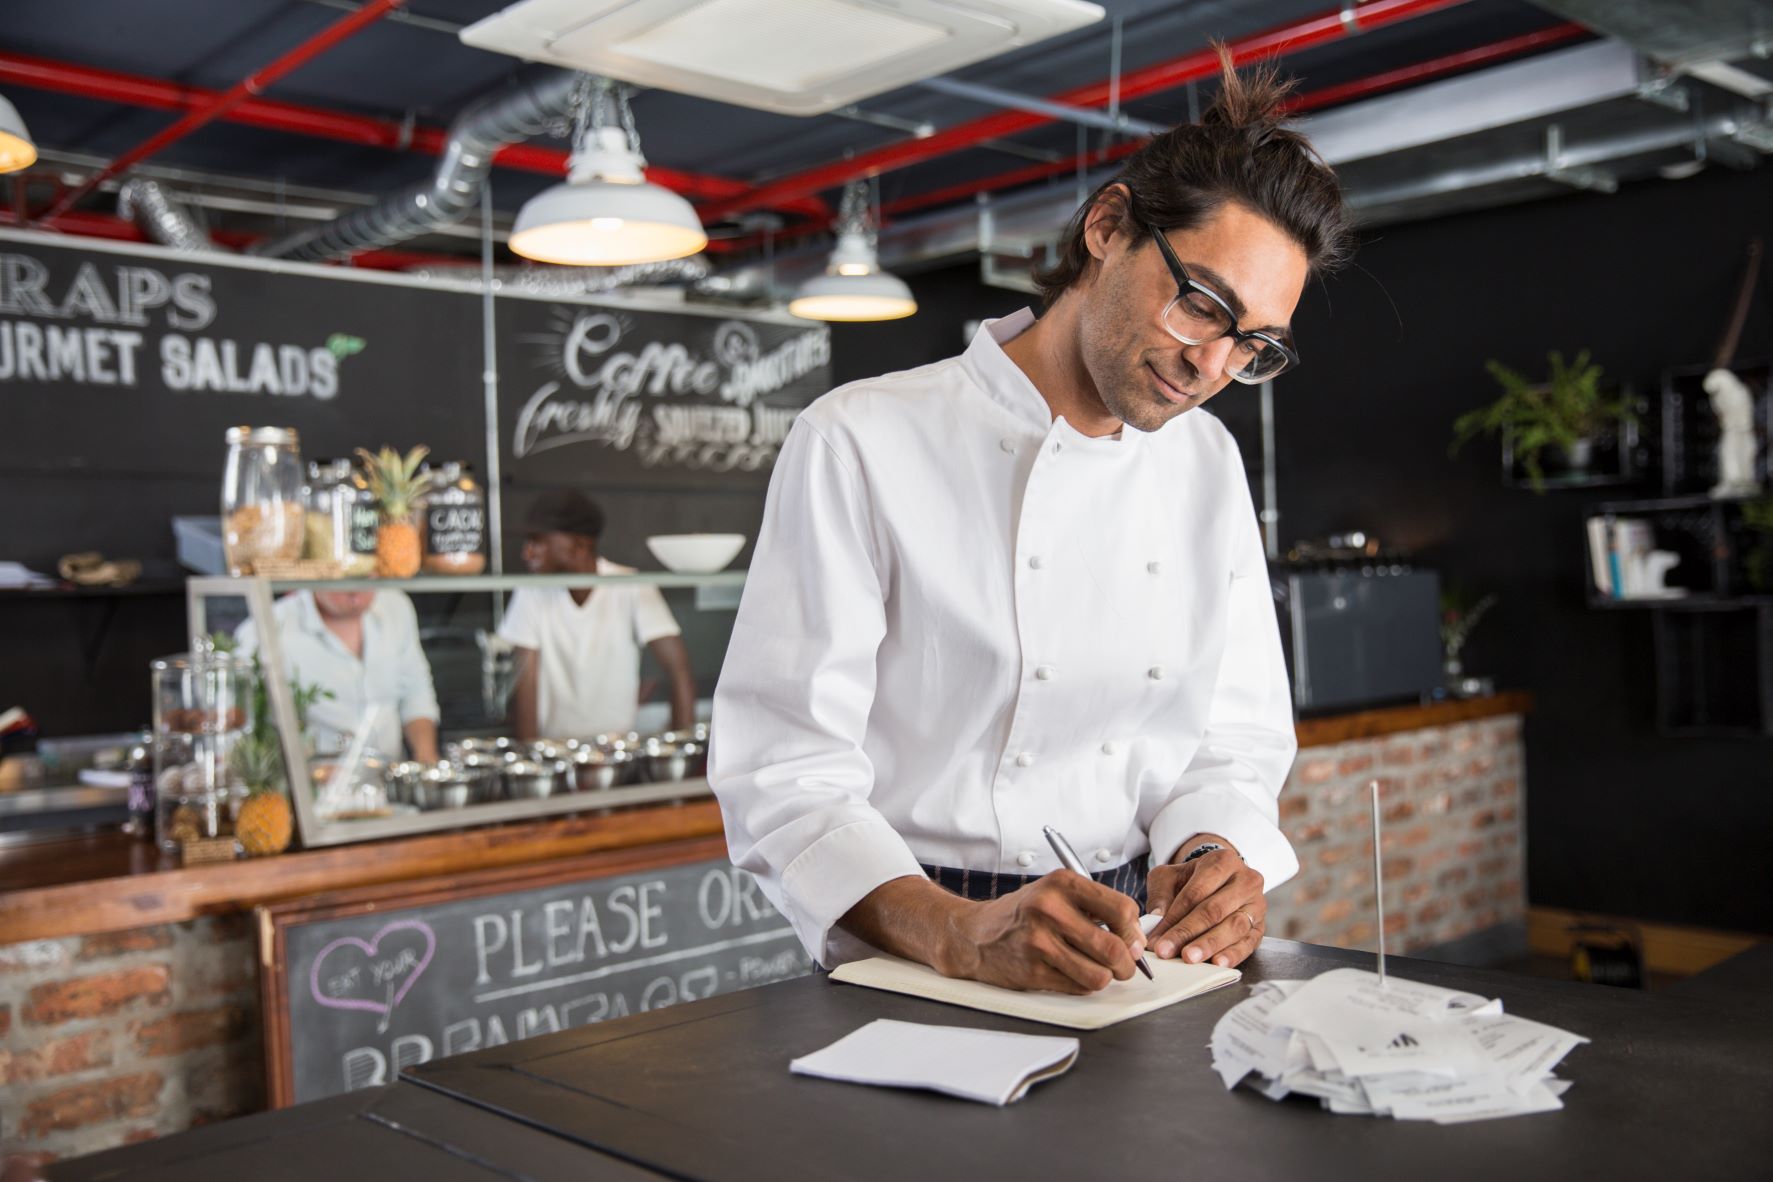 How to Maximize ROI for Your Restaurant